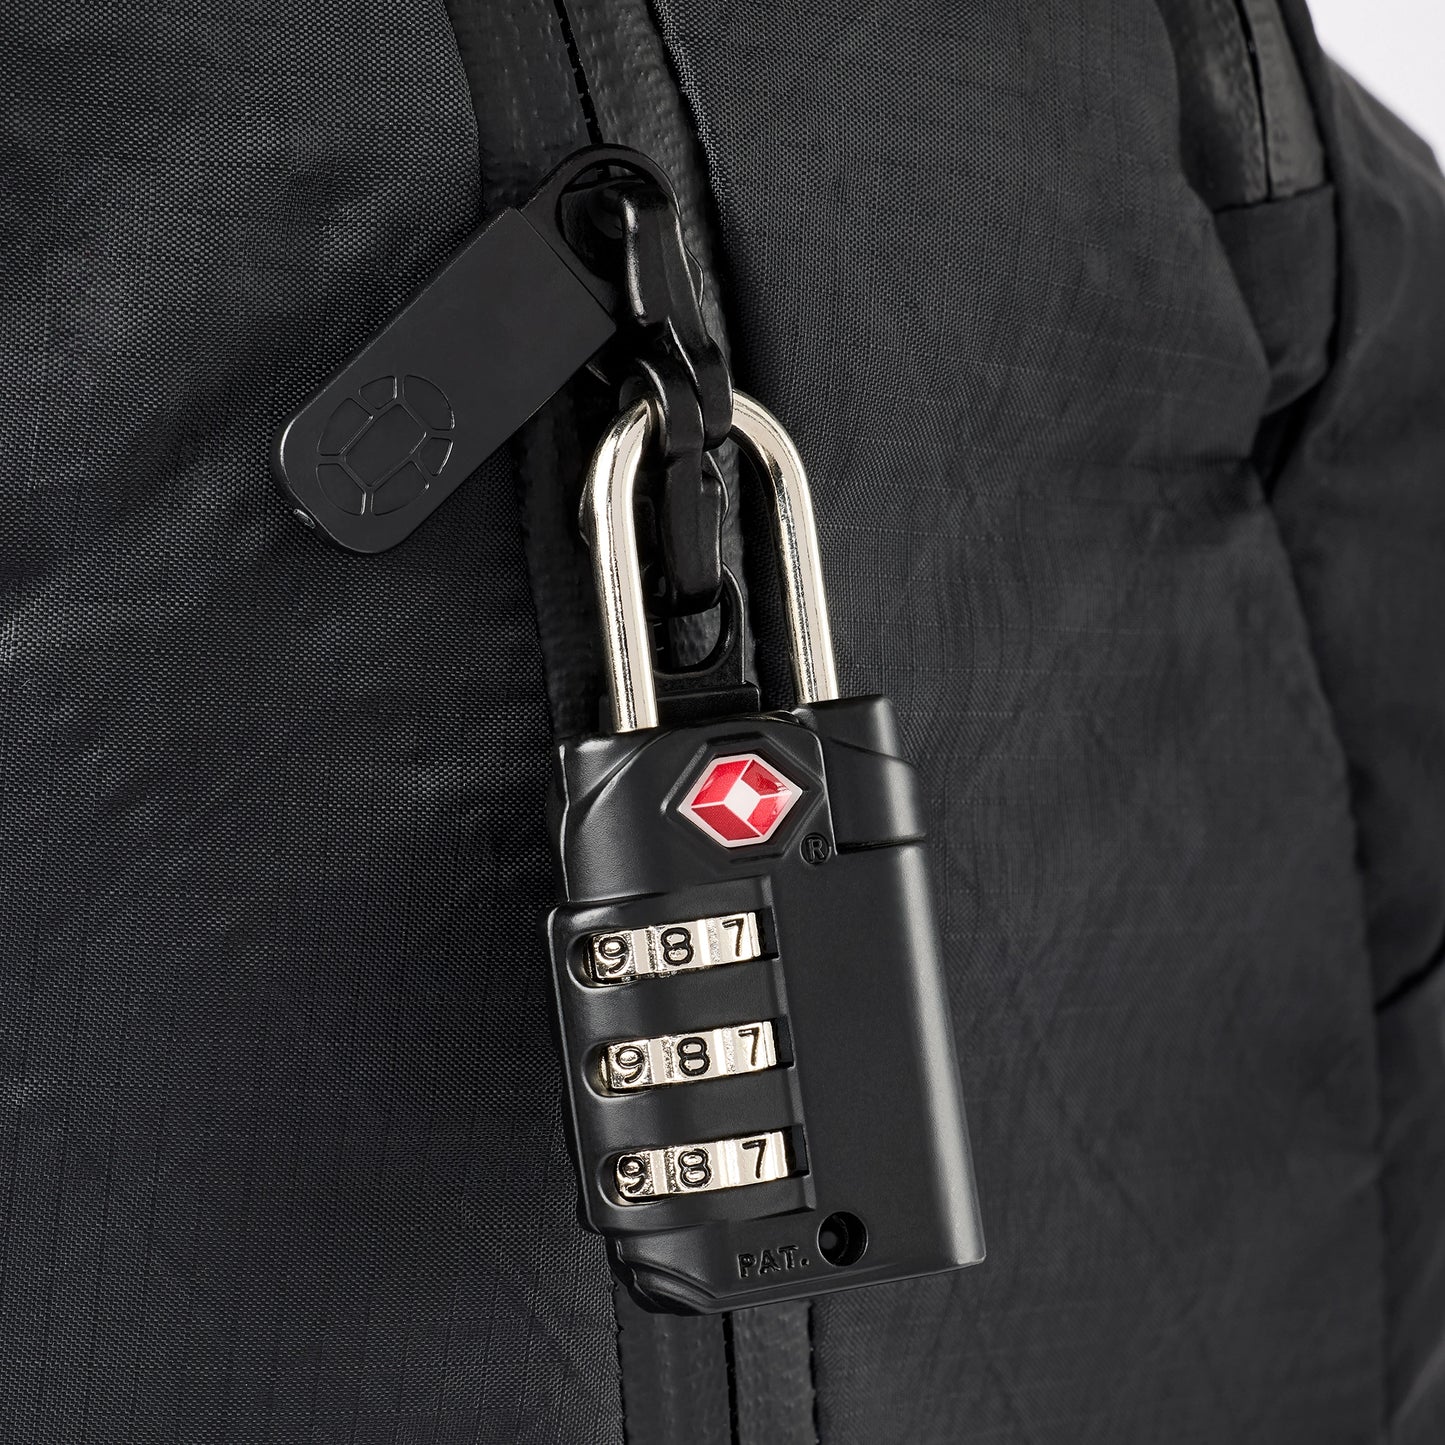 Lockable zippers to keep your stuff safe (lock not included)